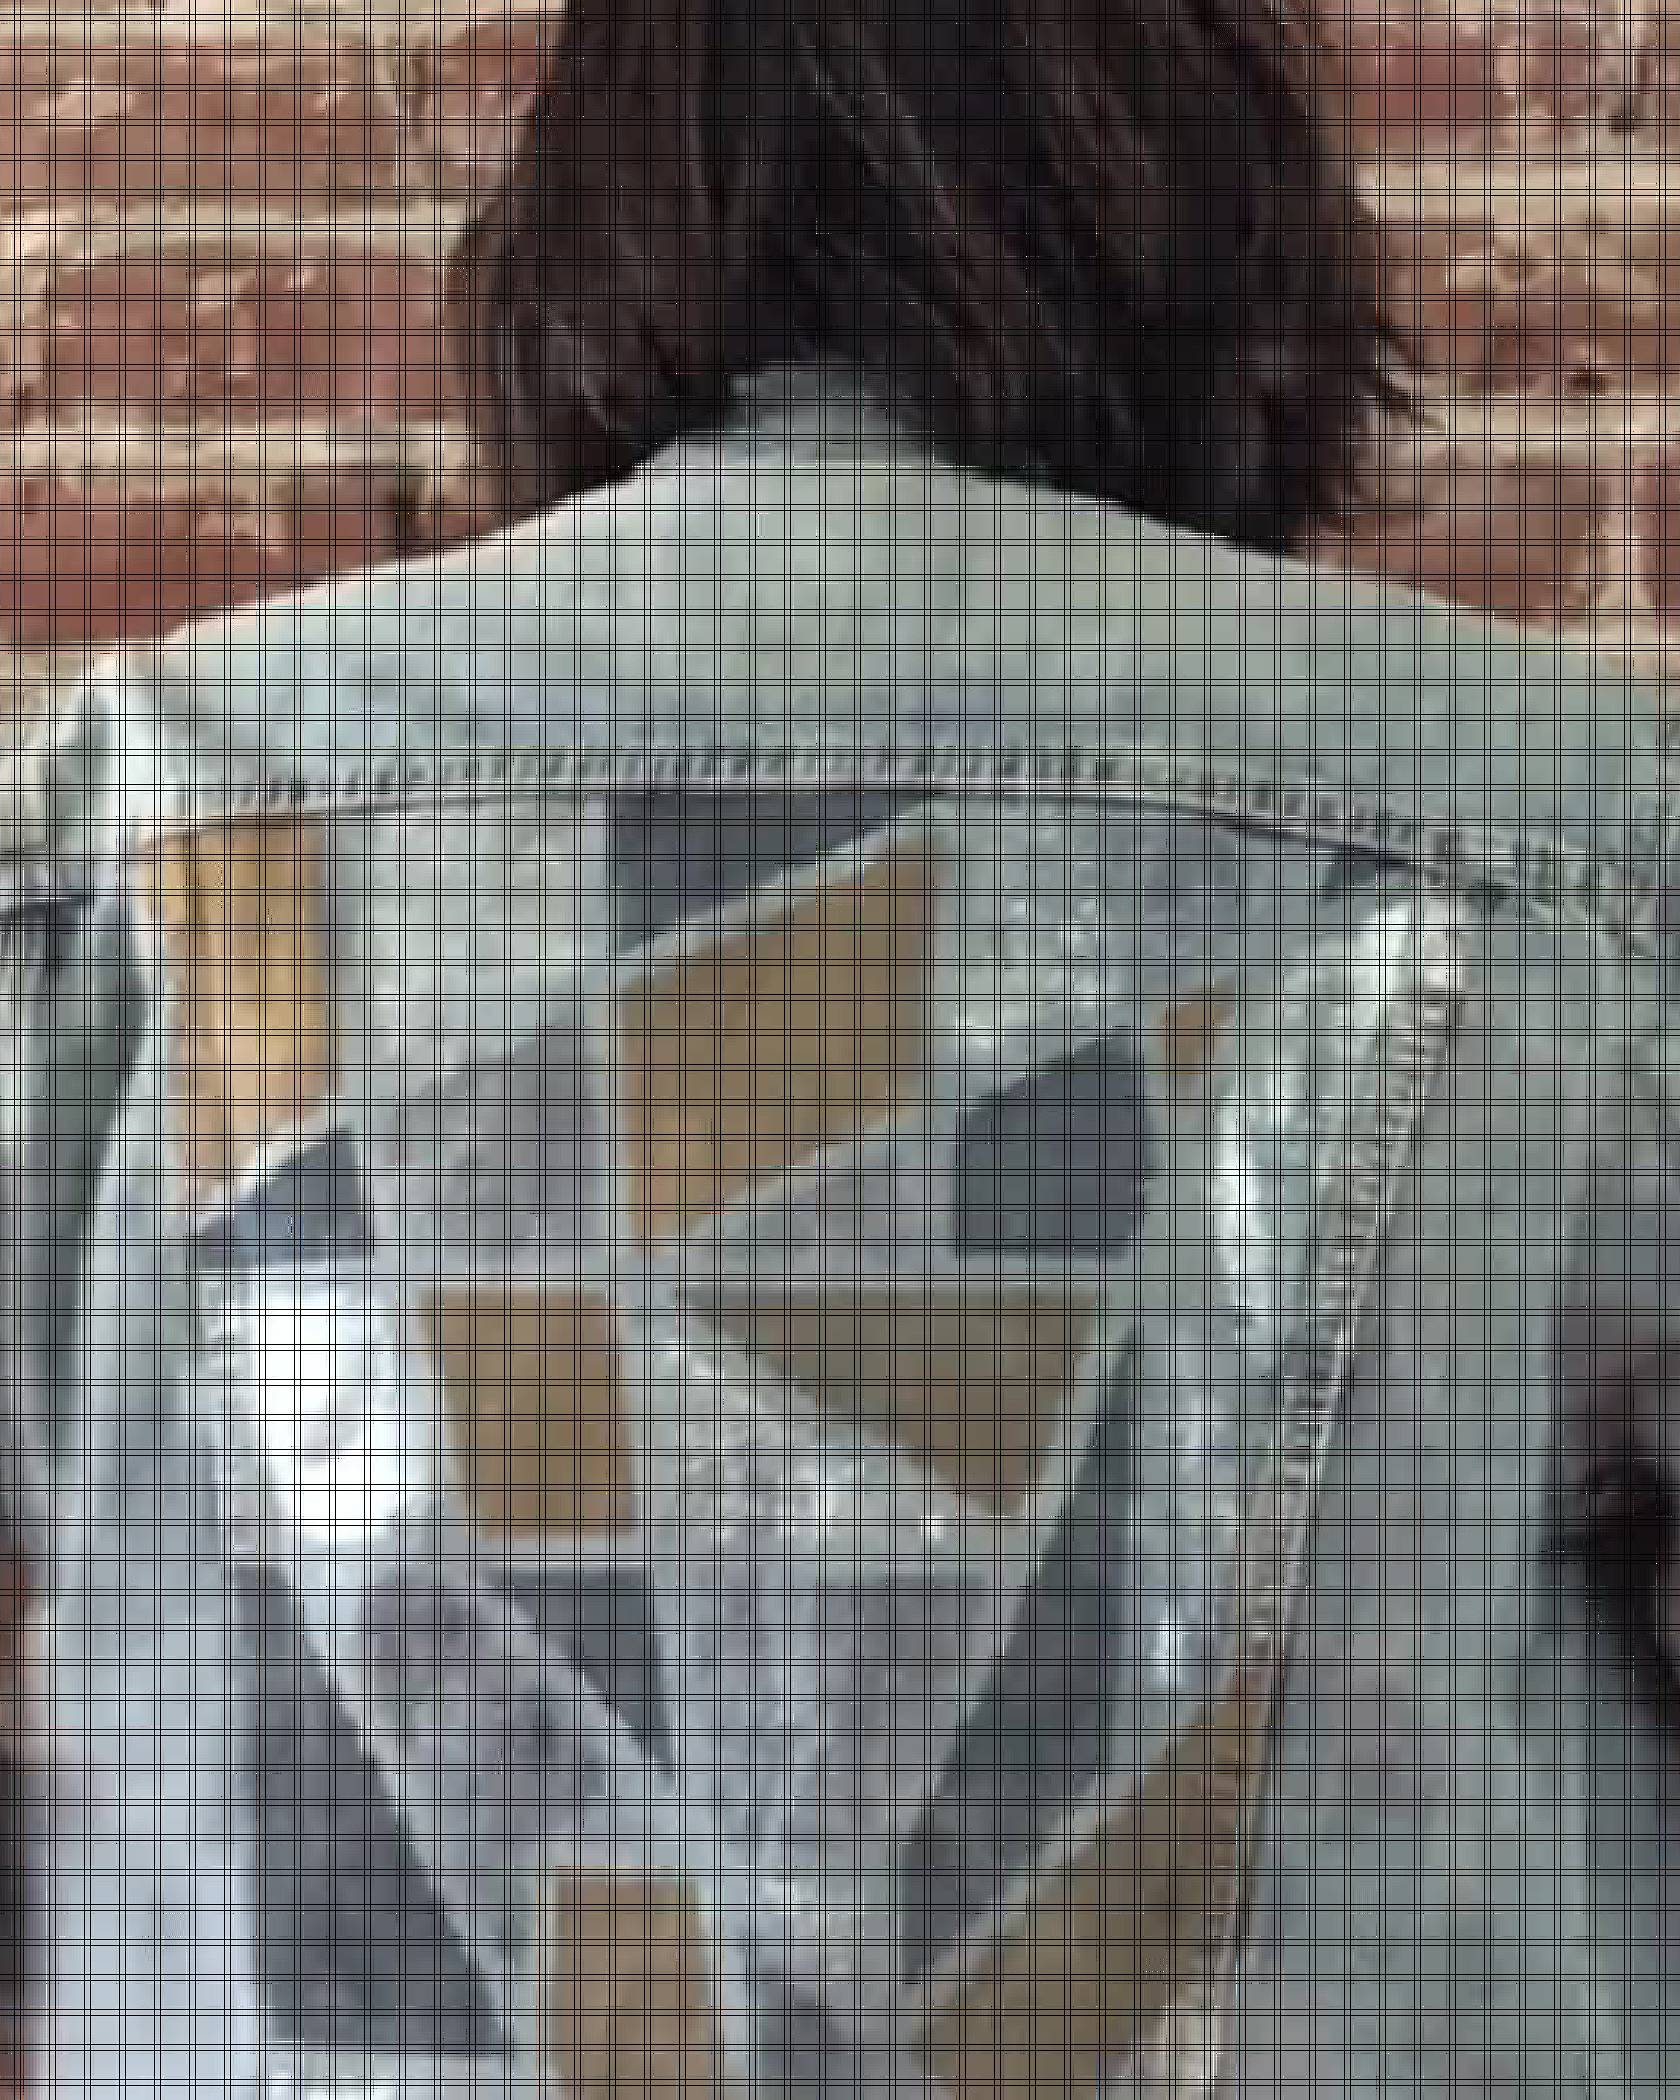 Video of Levi's® tailor, Jen Sharkey, smiling while holding up her newly designed trucker jacket and putting it on.